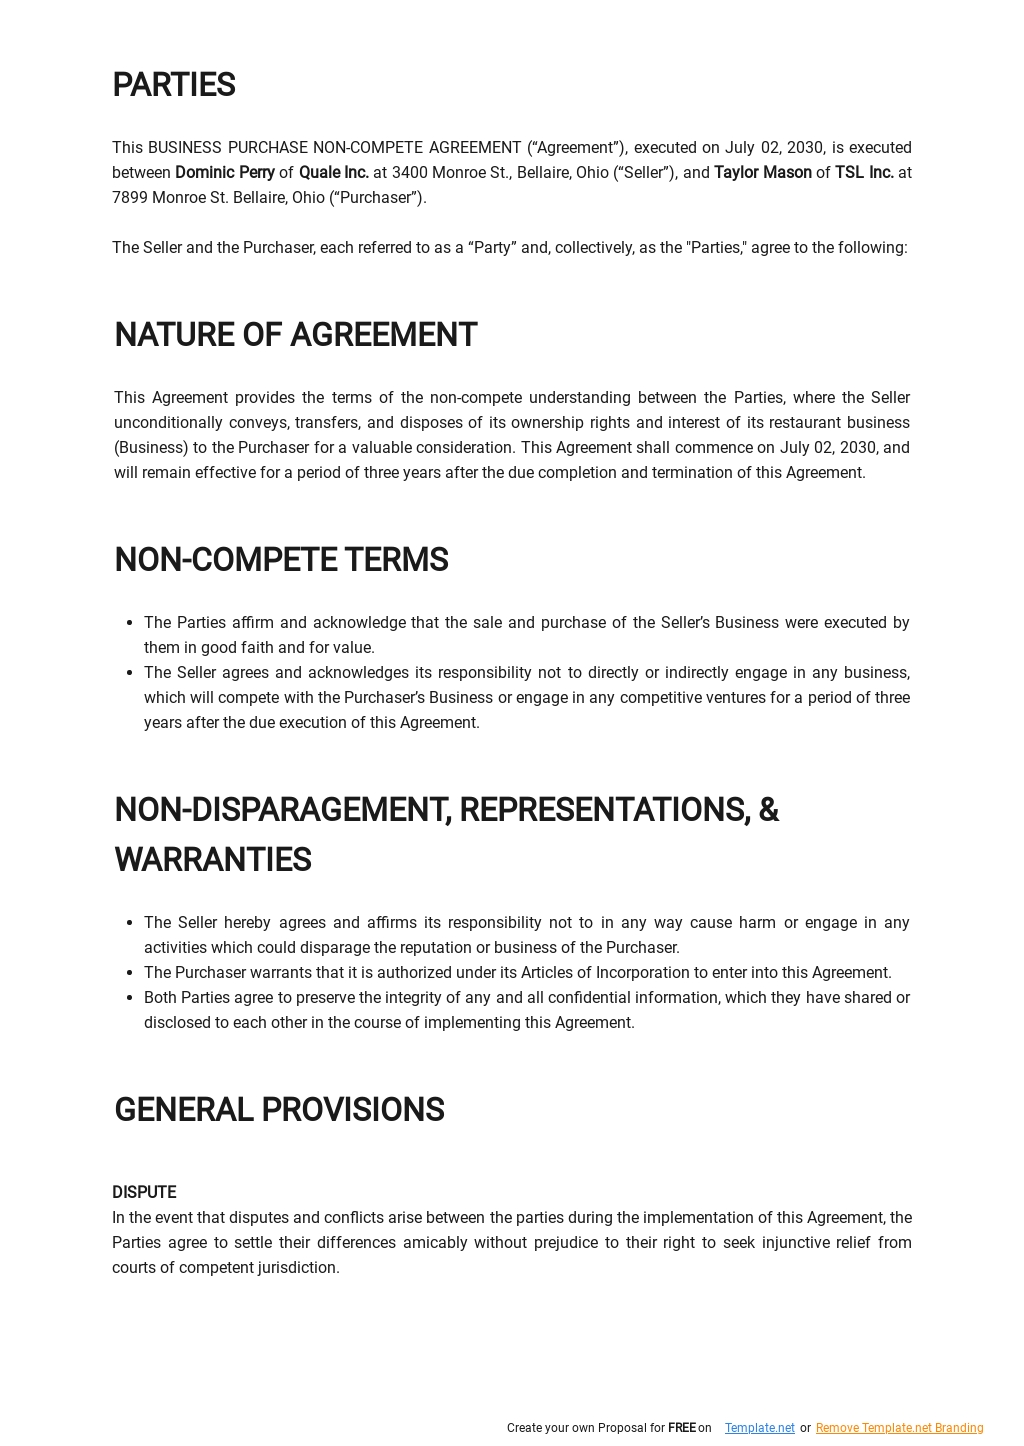 Business Purchase Non Compete Agreement Template 1.jpe